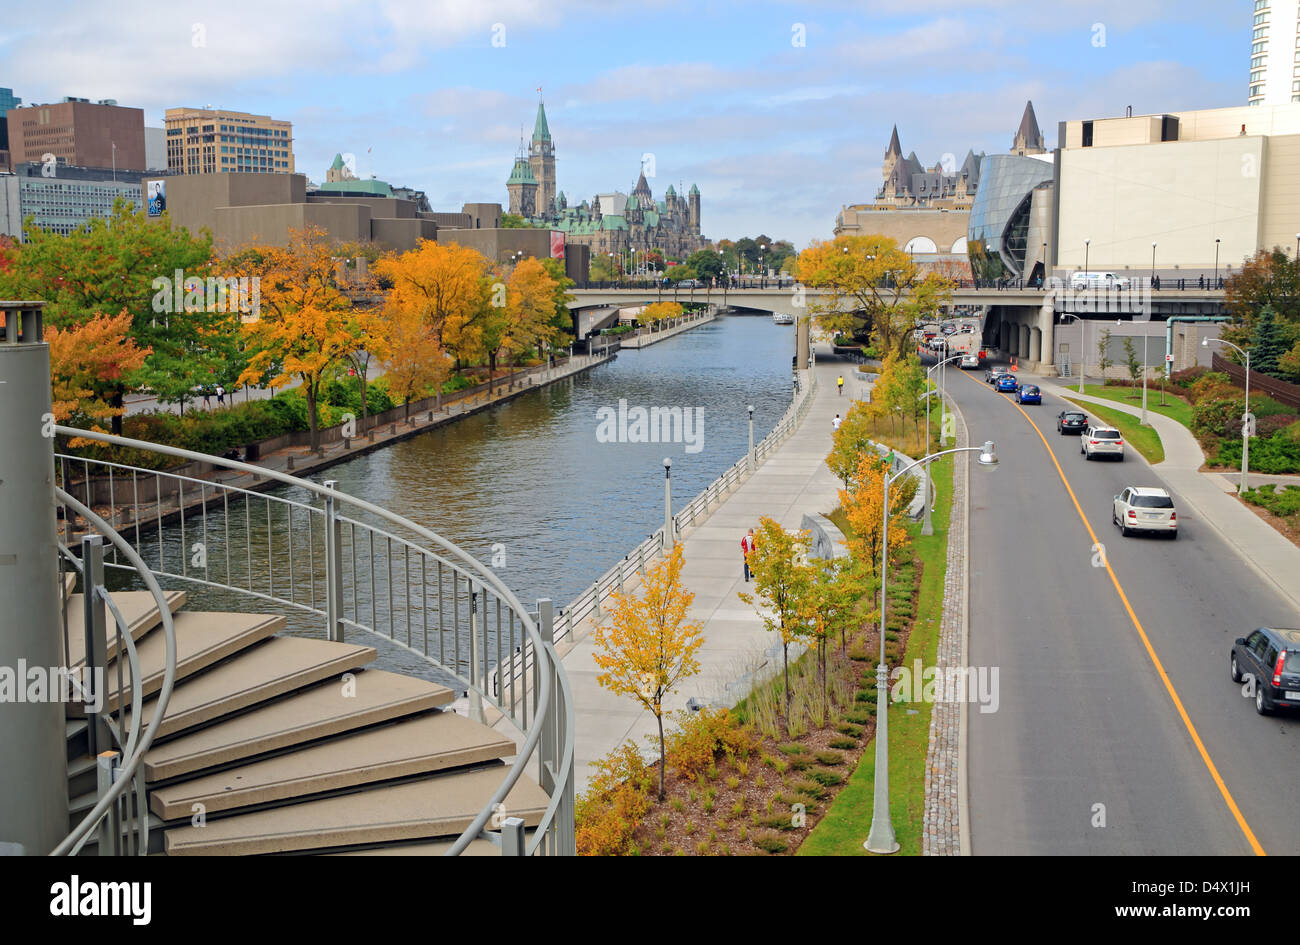 Ottawa, the capital city of Canada, in fall colors Stock Photo